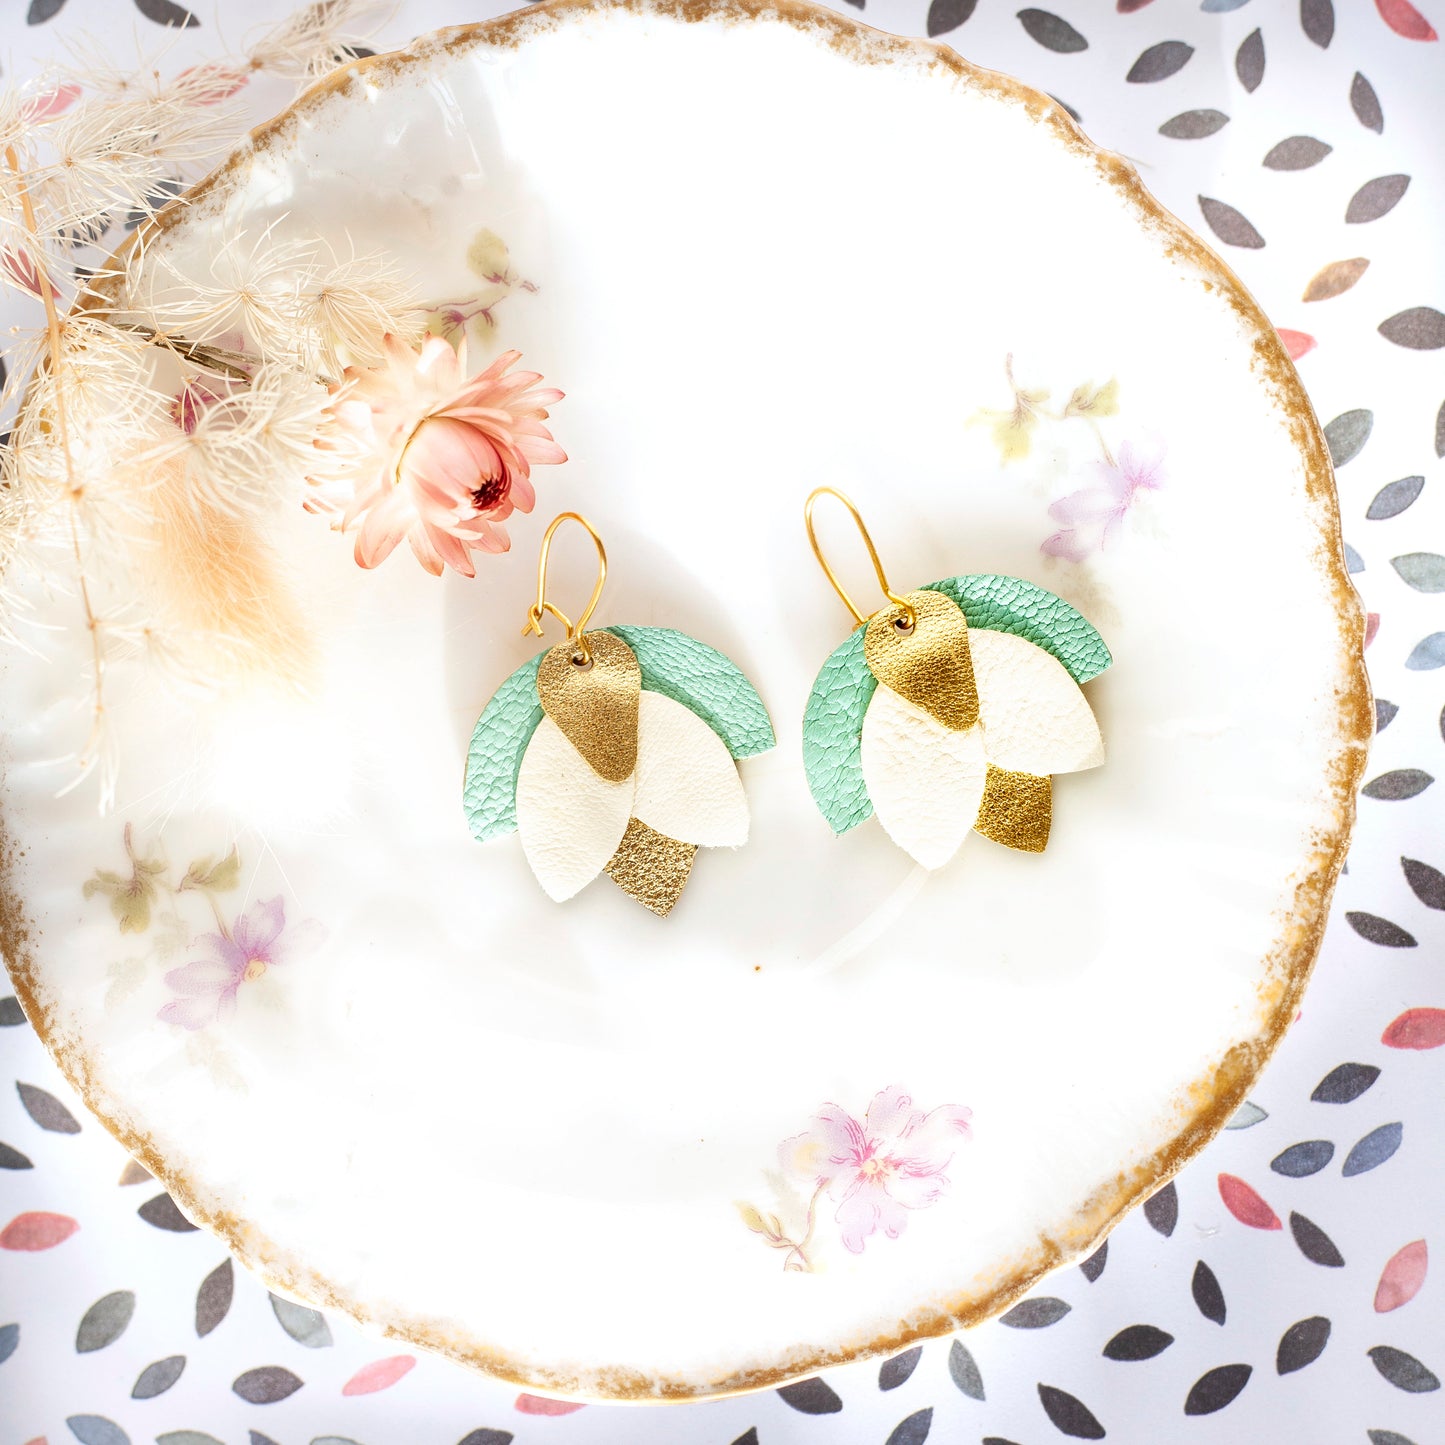 Narcisse earrings in white gold and jade green leather